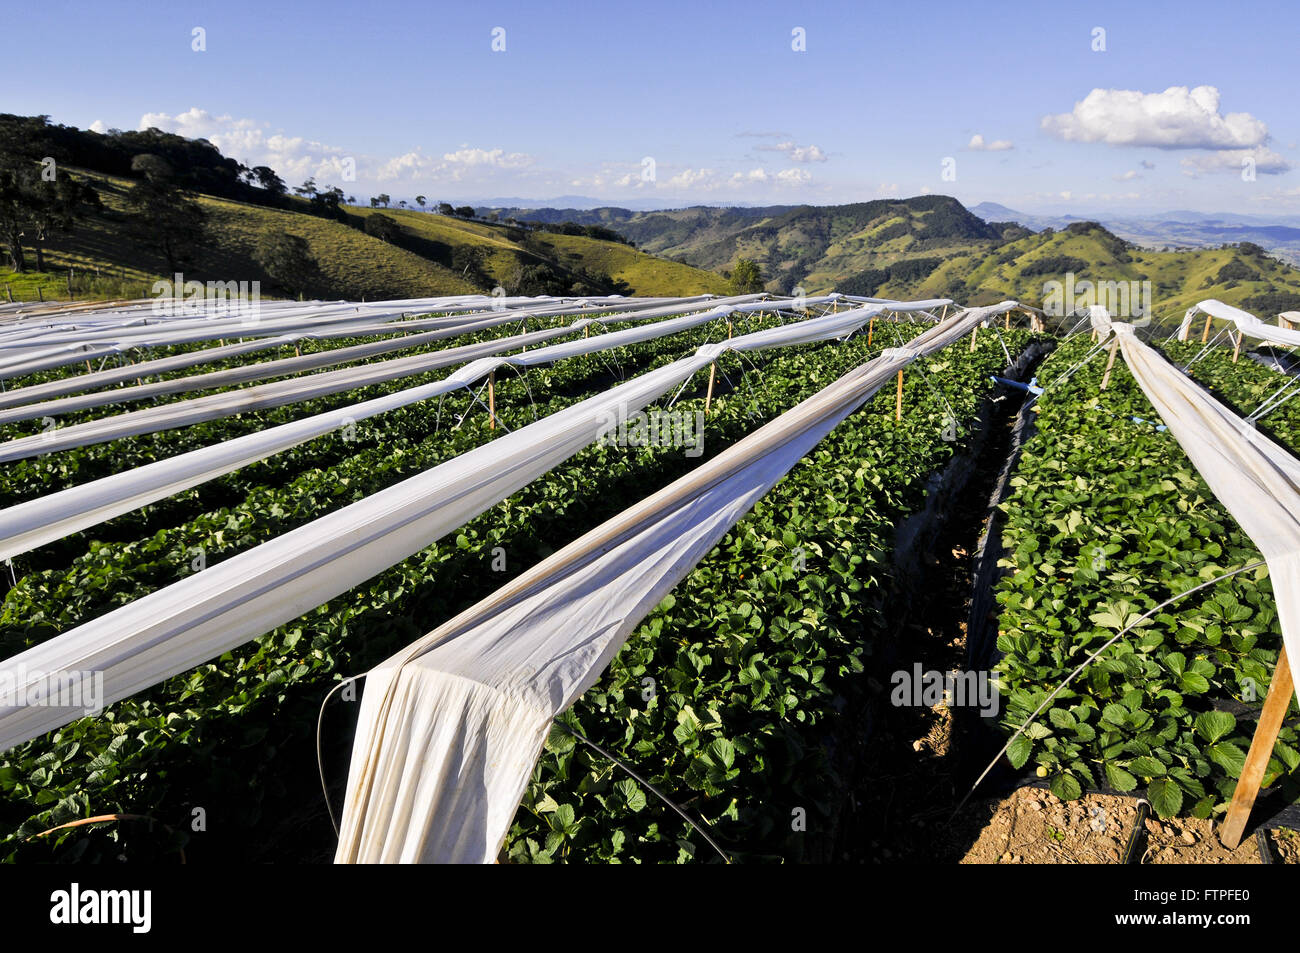 Plantation of strawberries in a rural town Stowage - south of Minas Gerais Stock Photo